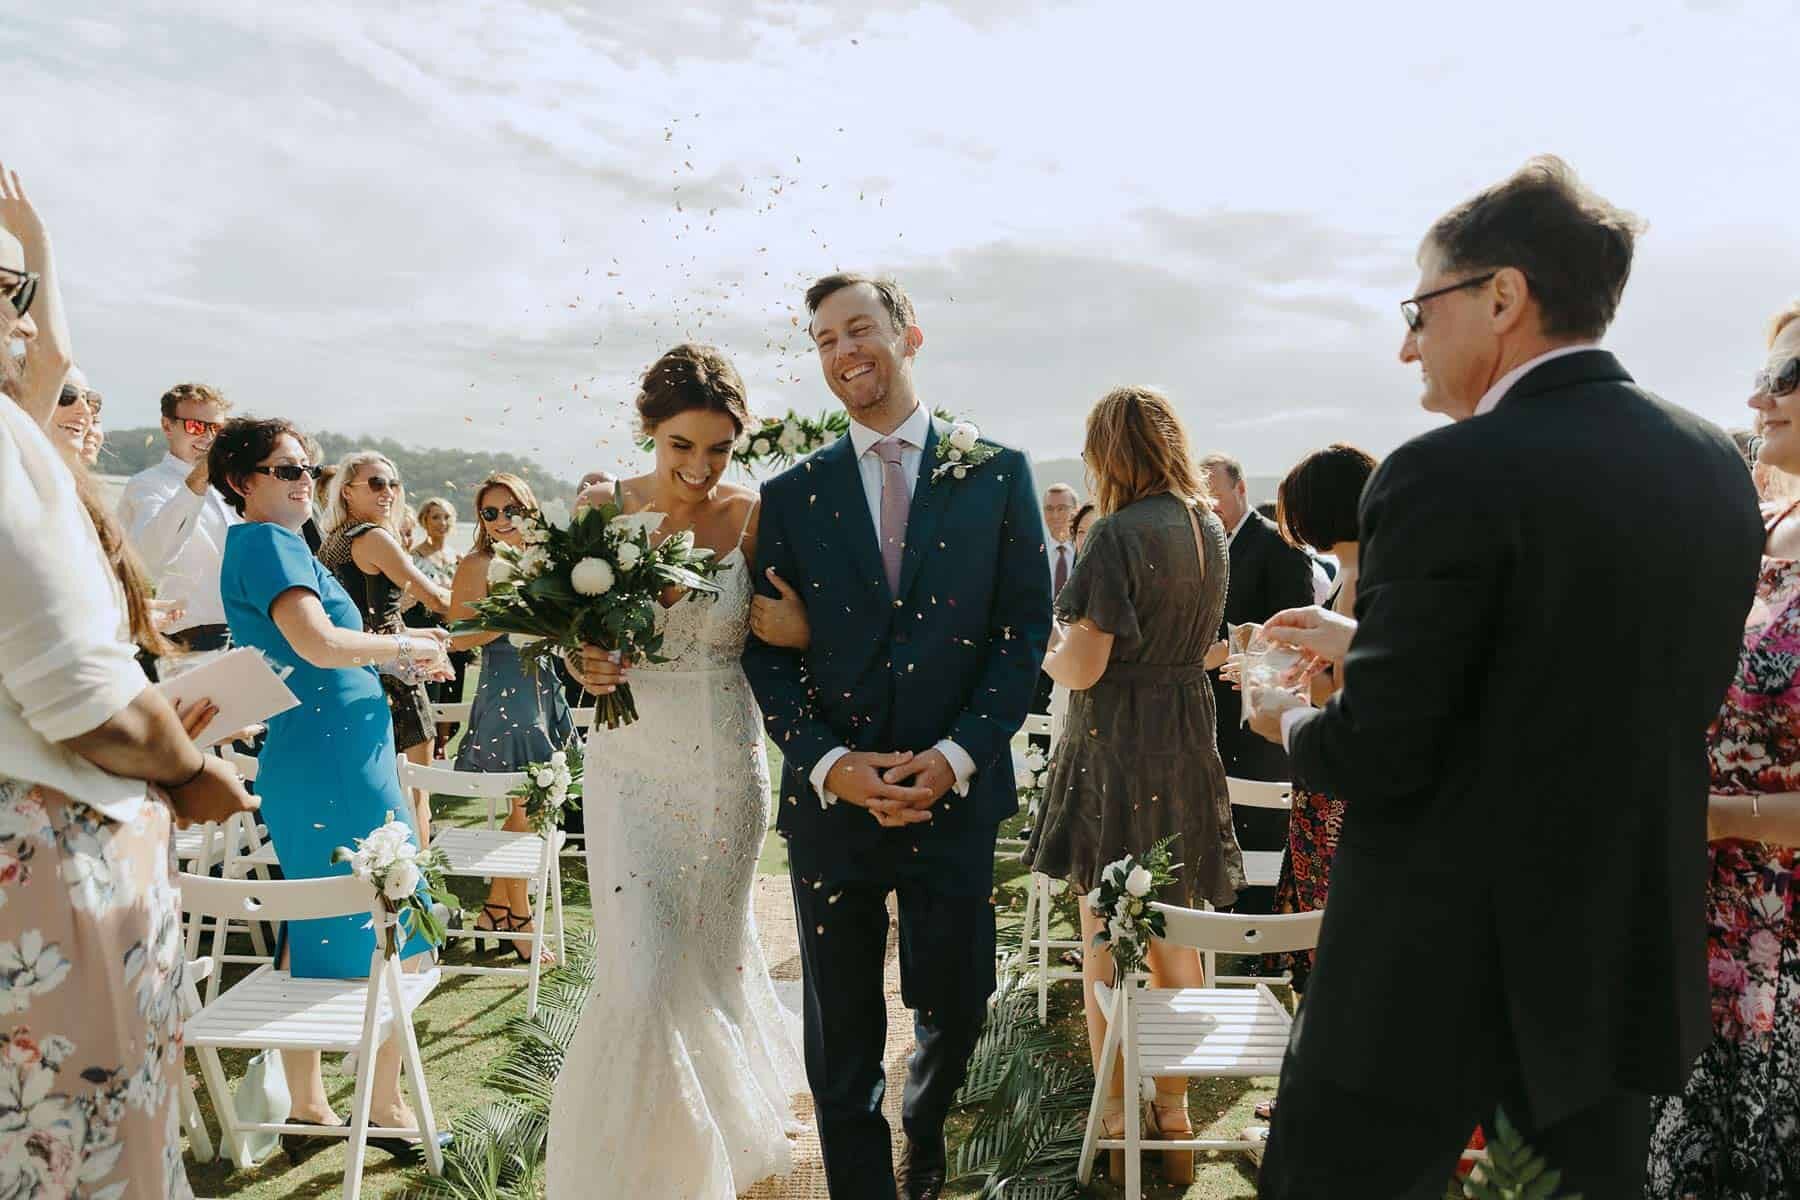 Grace loves Lace gown with navy suit at Moby Dicks Whale Beach wedding